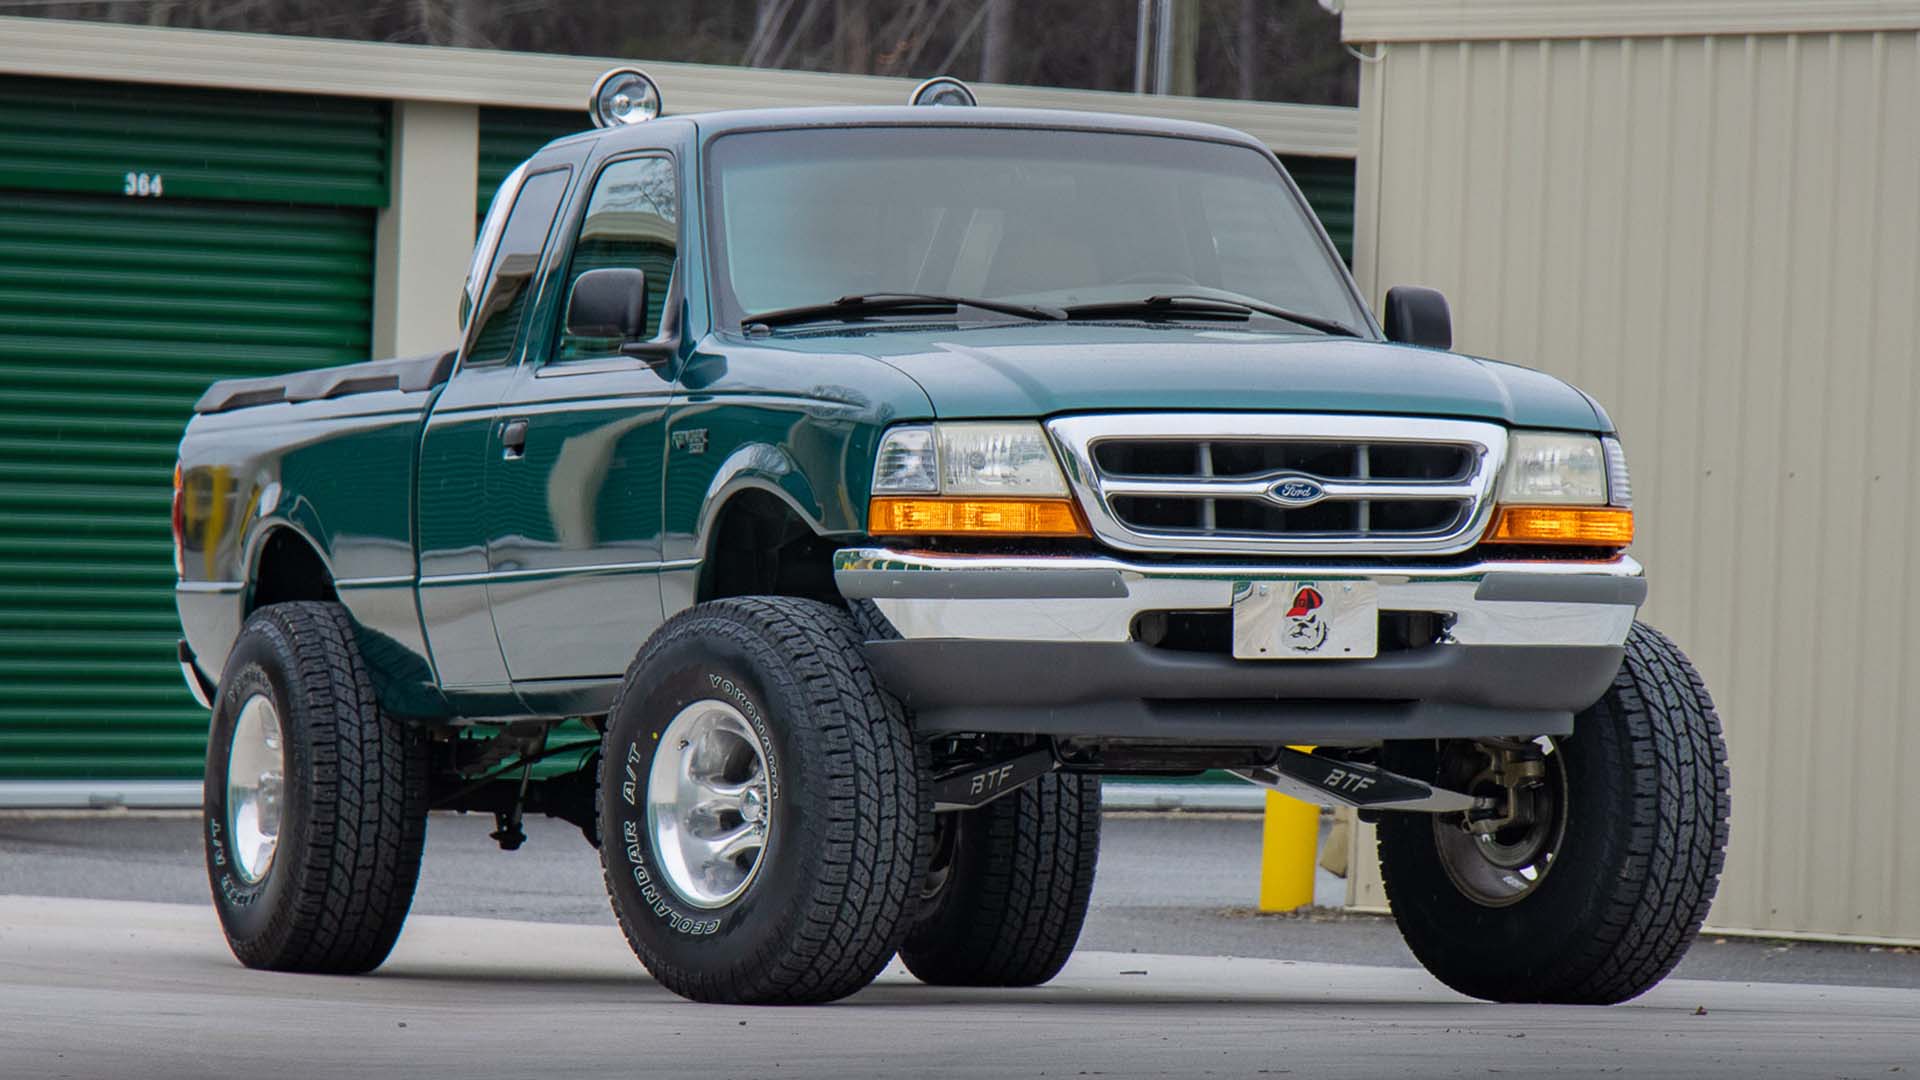 This 1998 Ford Ranger Has To Be the Most Tastefully Modified Out There